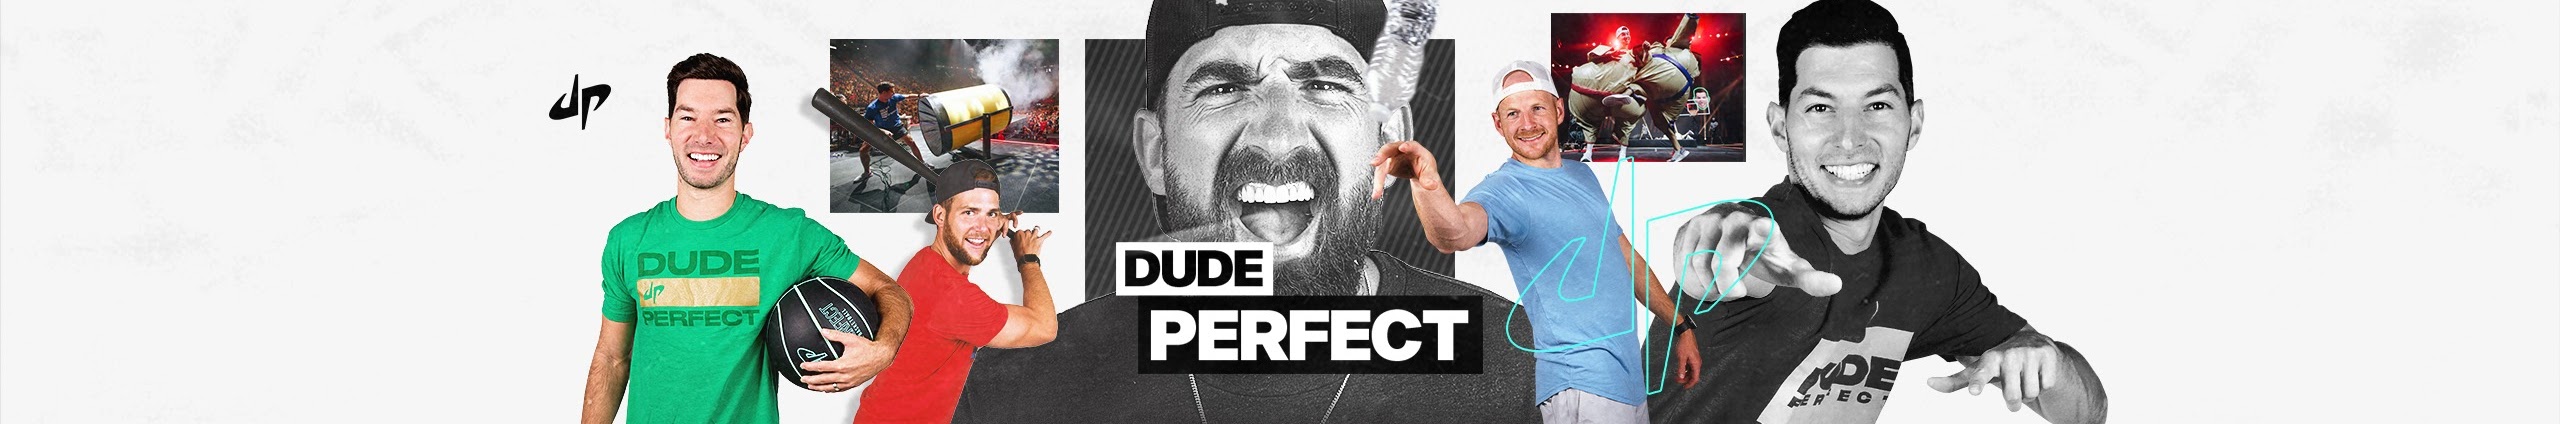 Dude Perfect - On Tuby